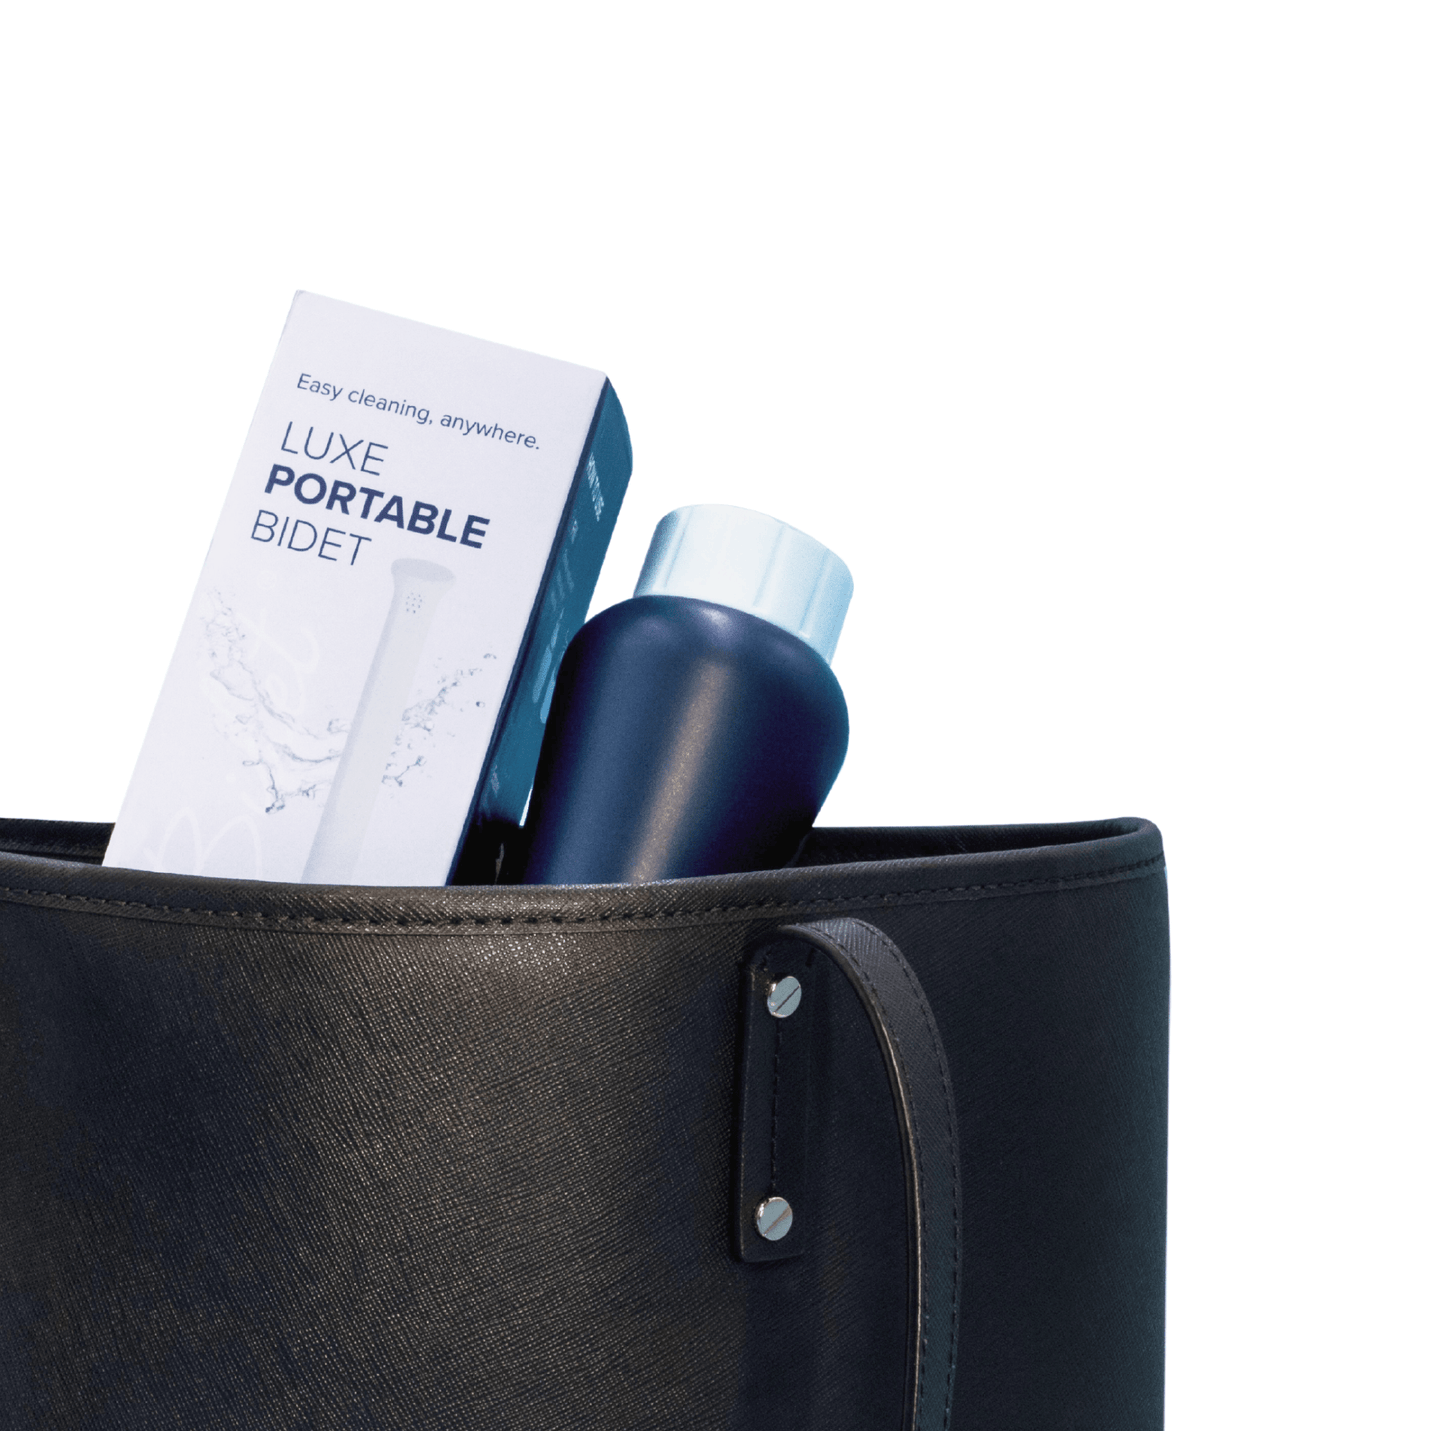 LUXE Portable Bidet with its packaging in a purse. *Purse not included